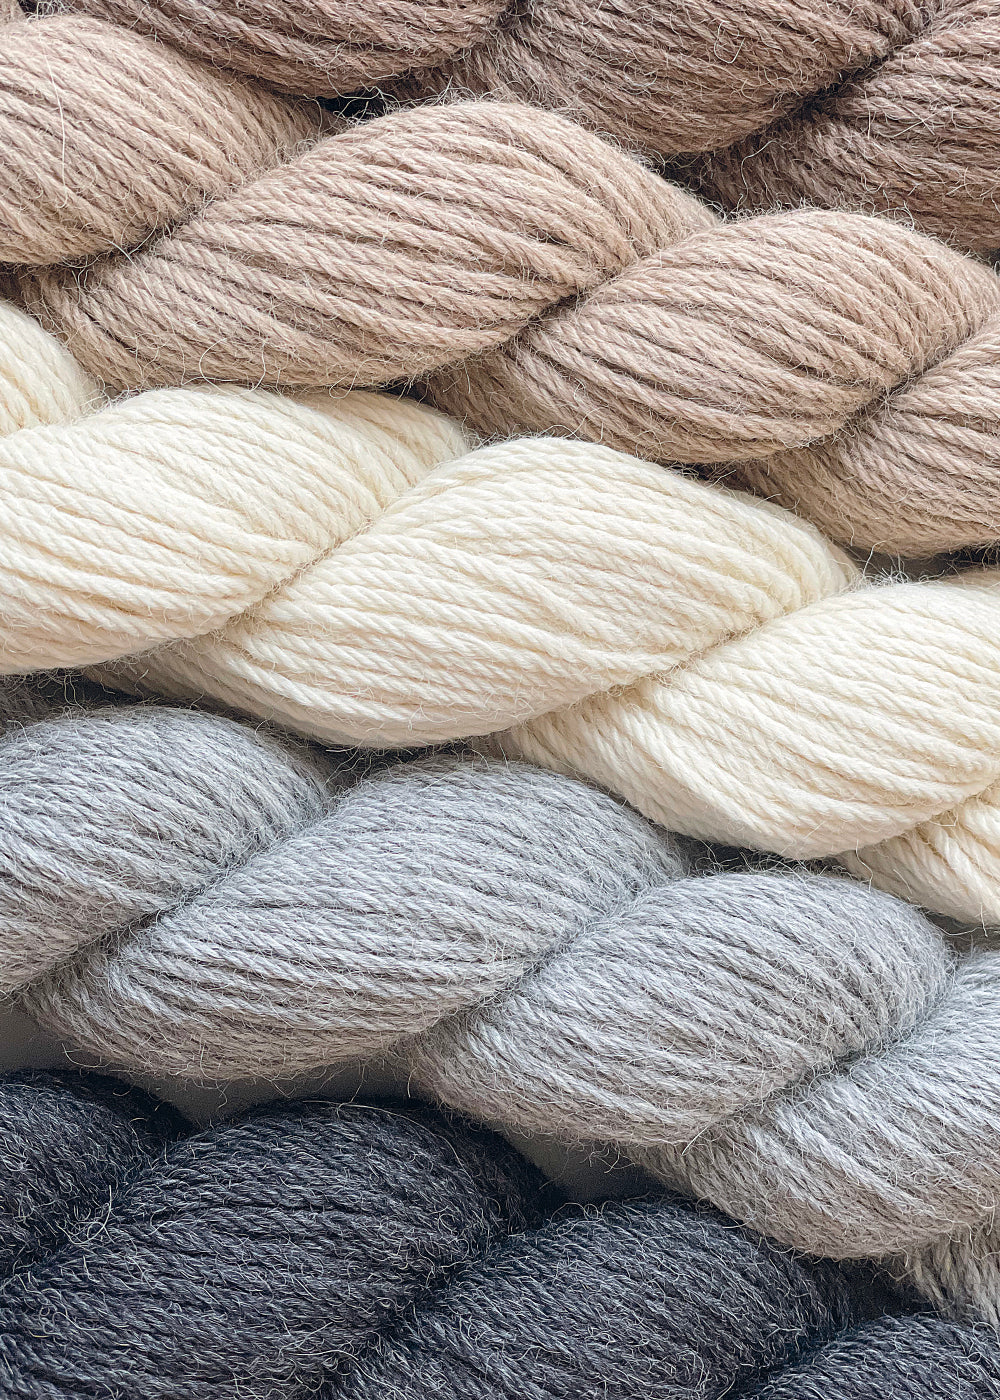 Pascuali - Knitting with luxury natural yarns from all over the world